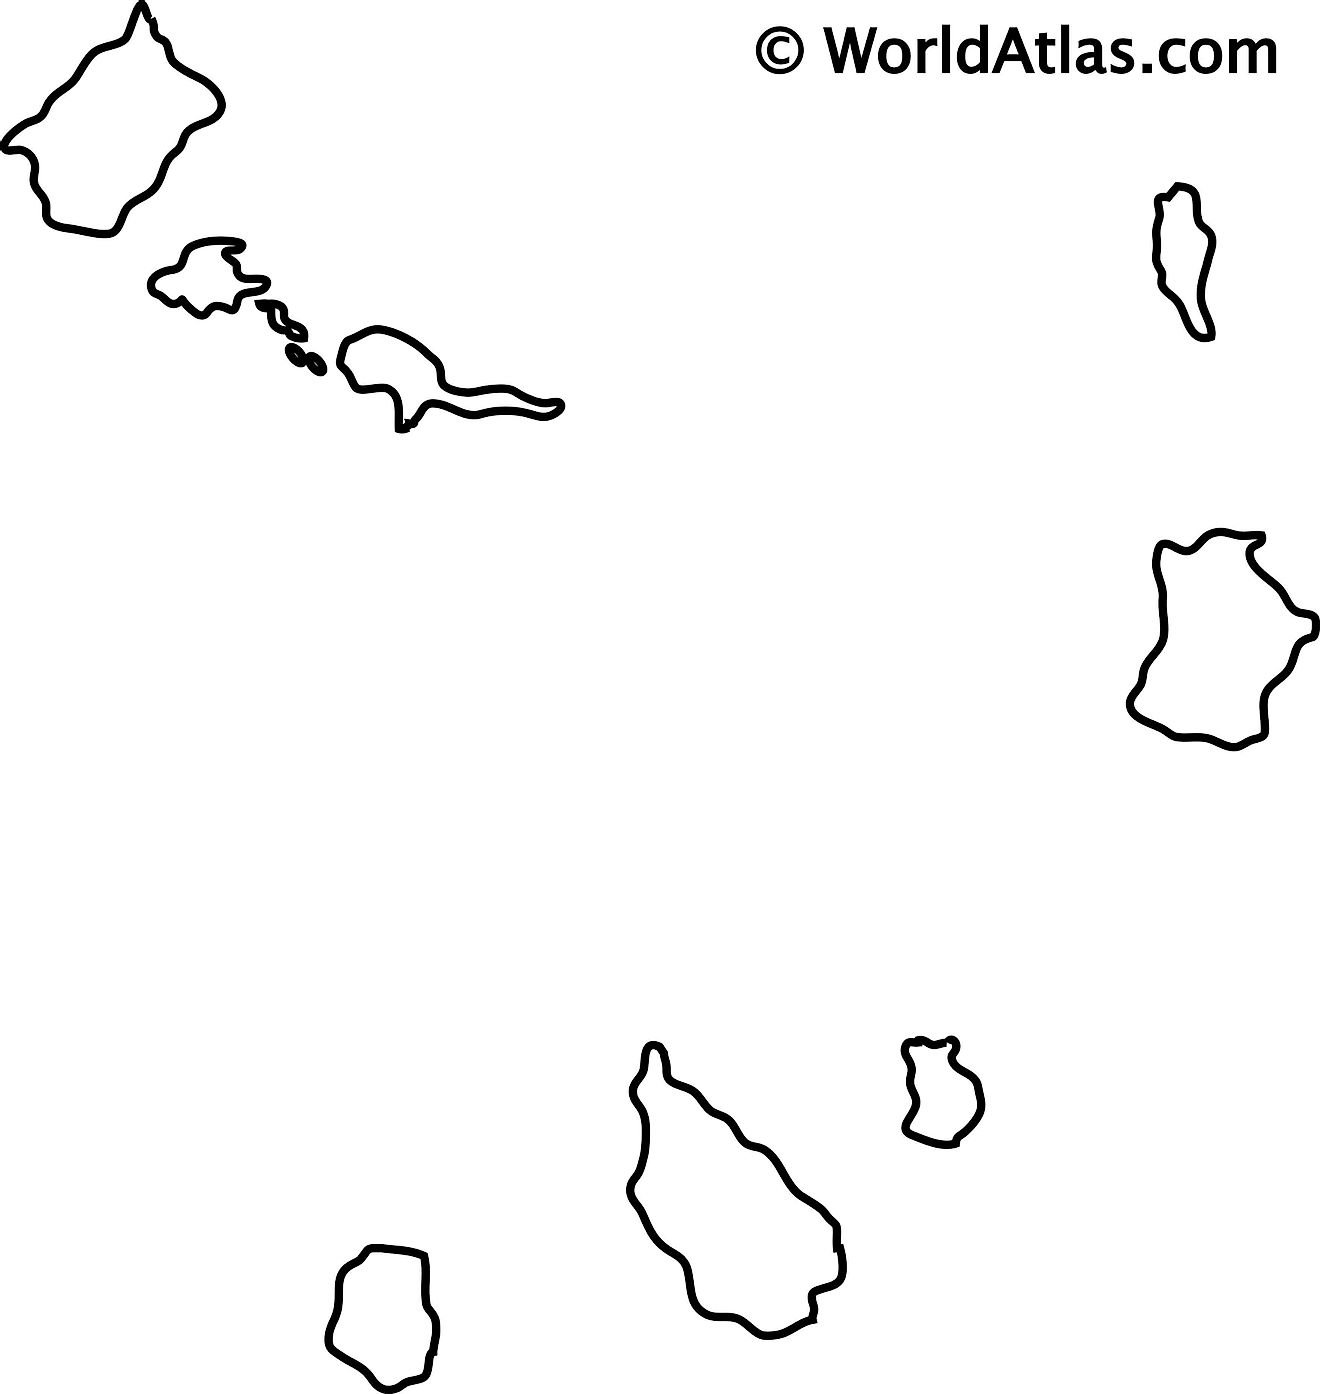 Outline map of Cape Verde